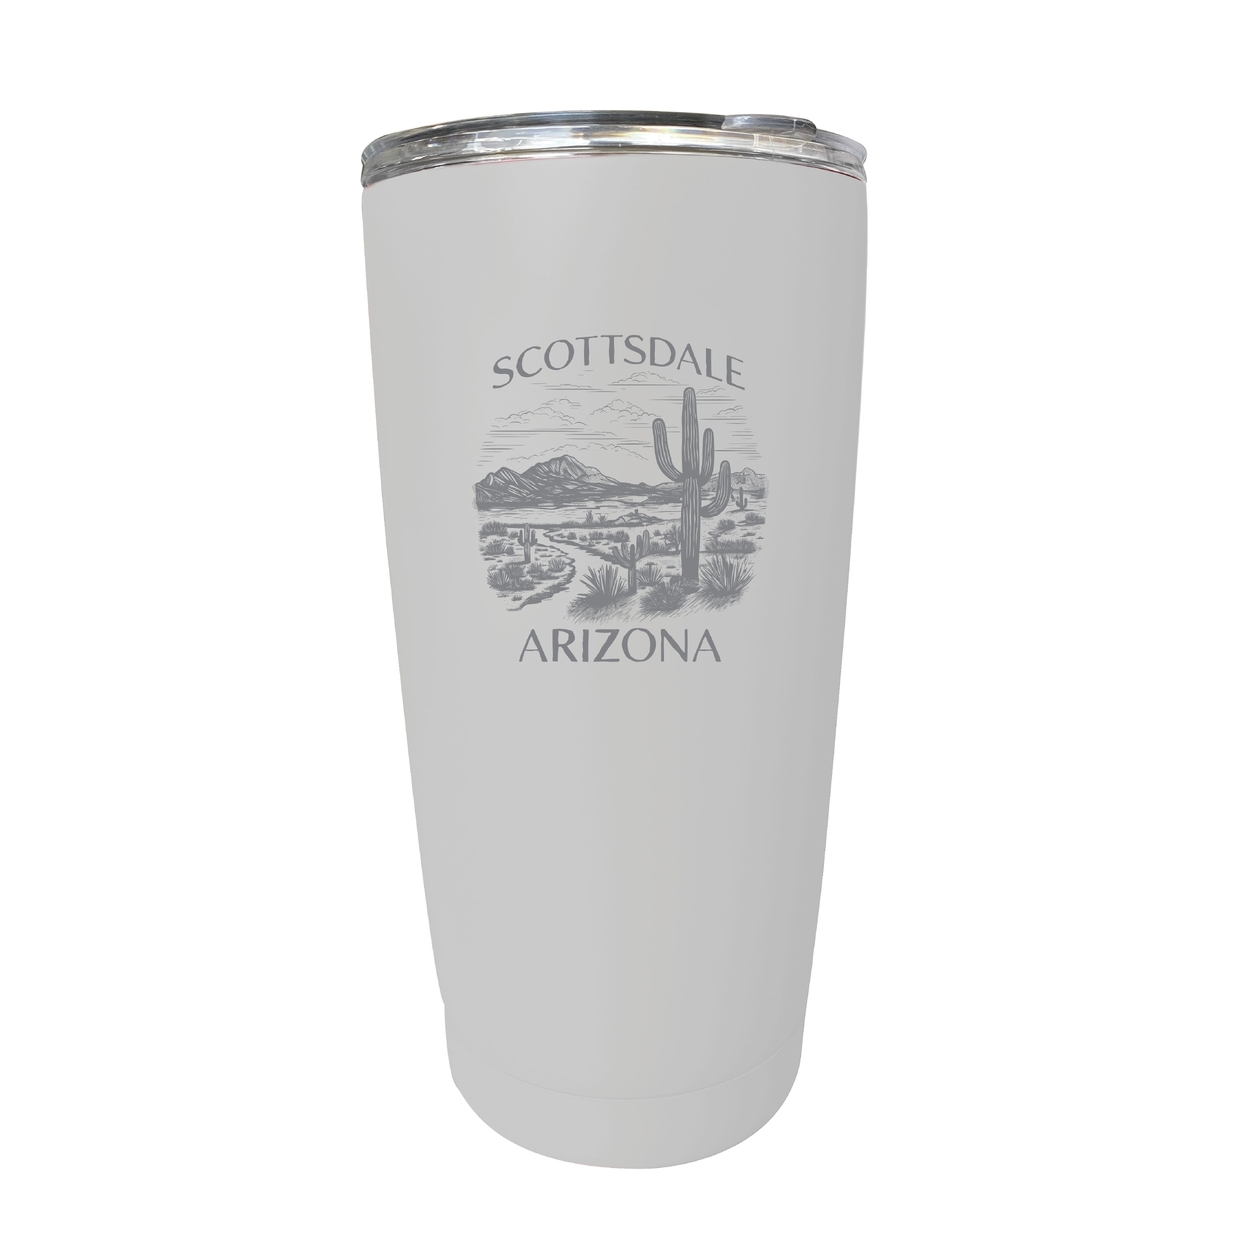 Scottsdale Arizona Souvenir 16 Oz Engraved Stainless Steel Insulated Tumbler - Red,,2-Pack